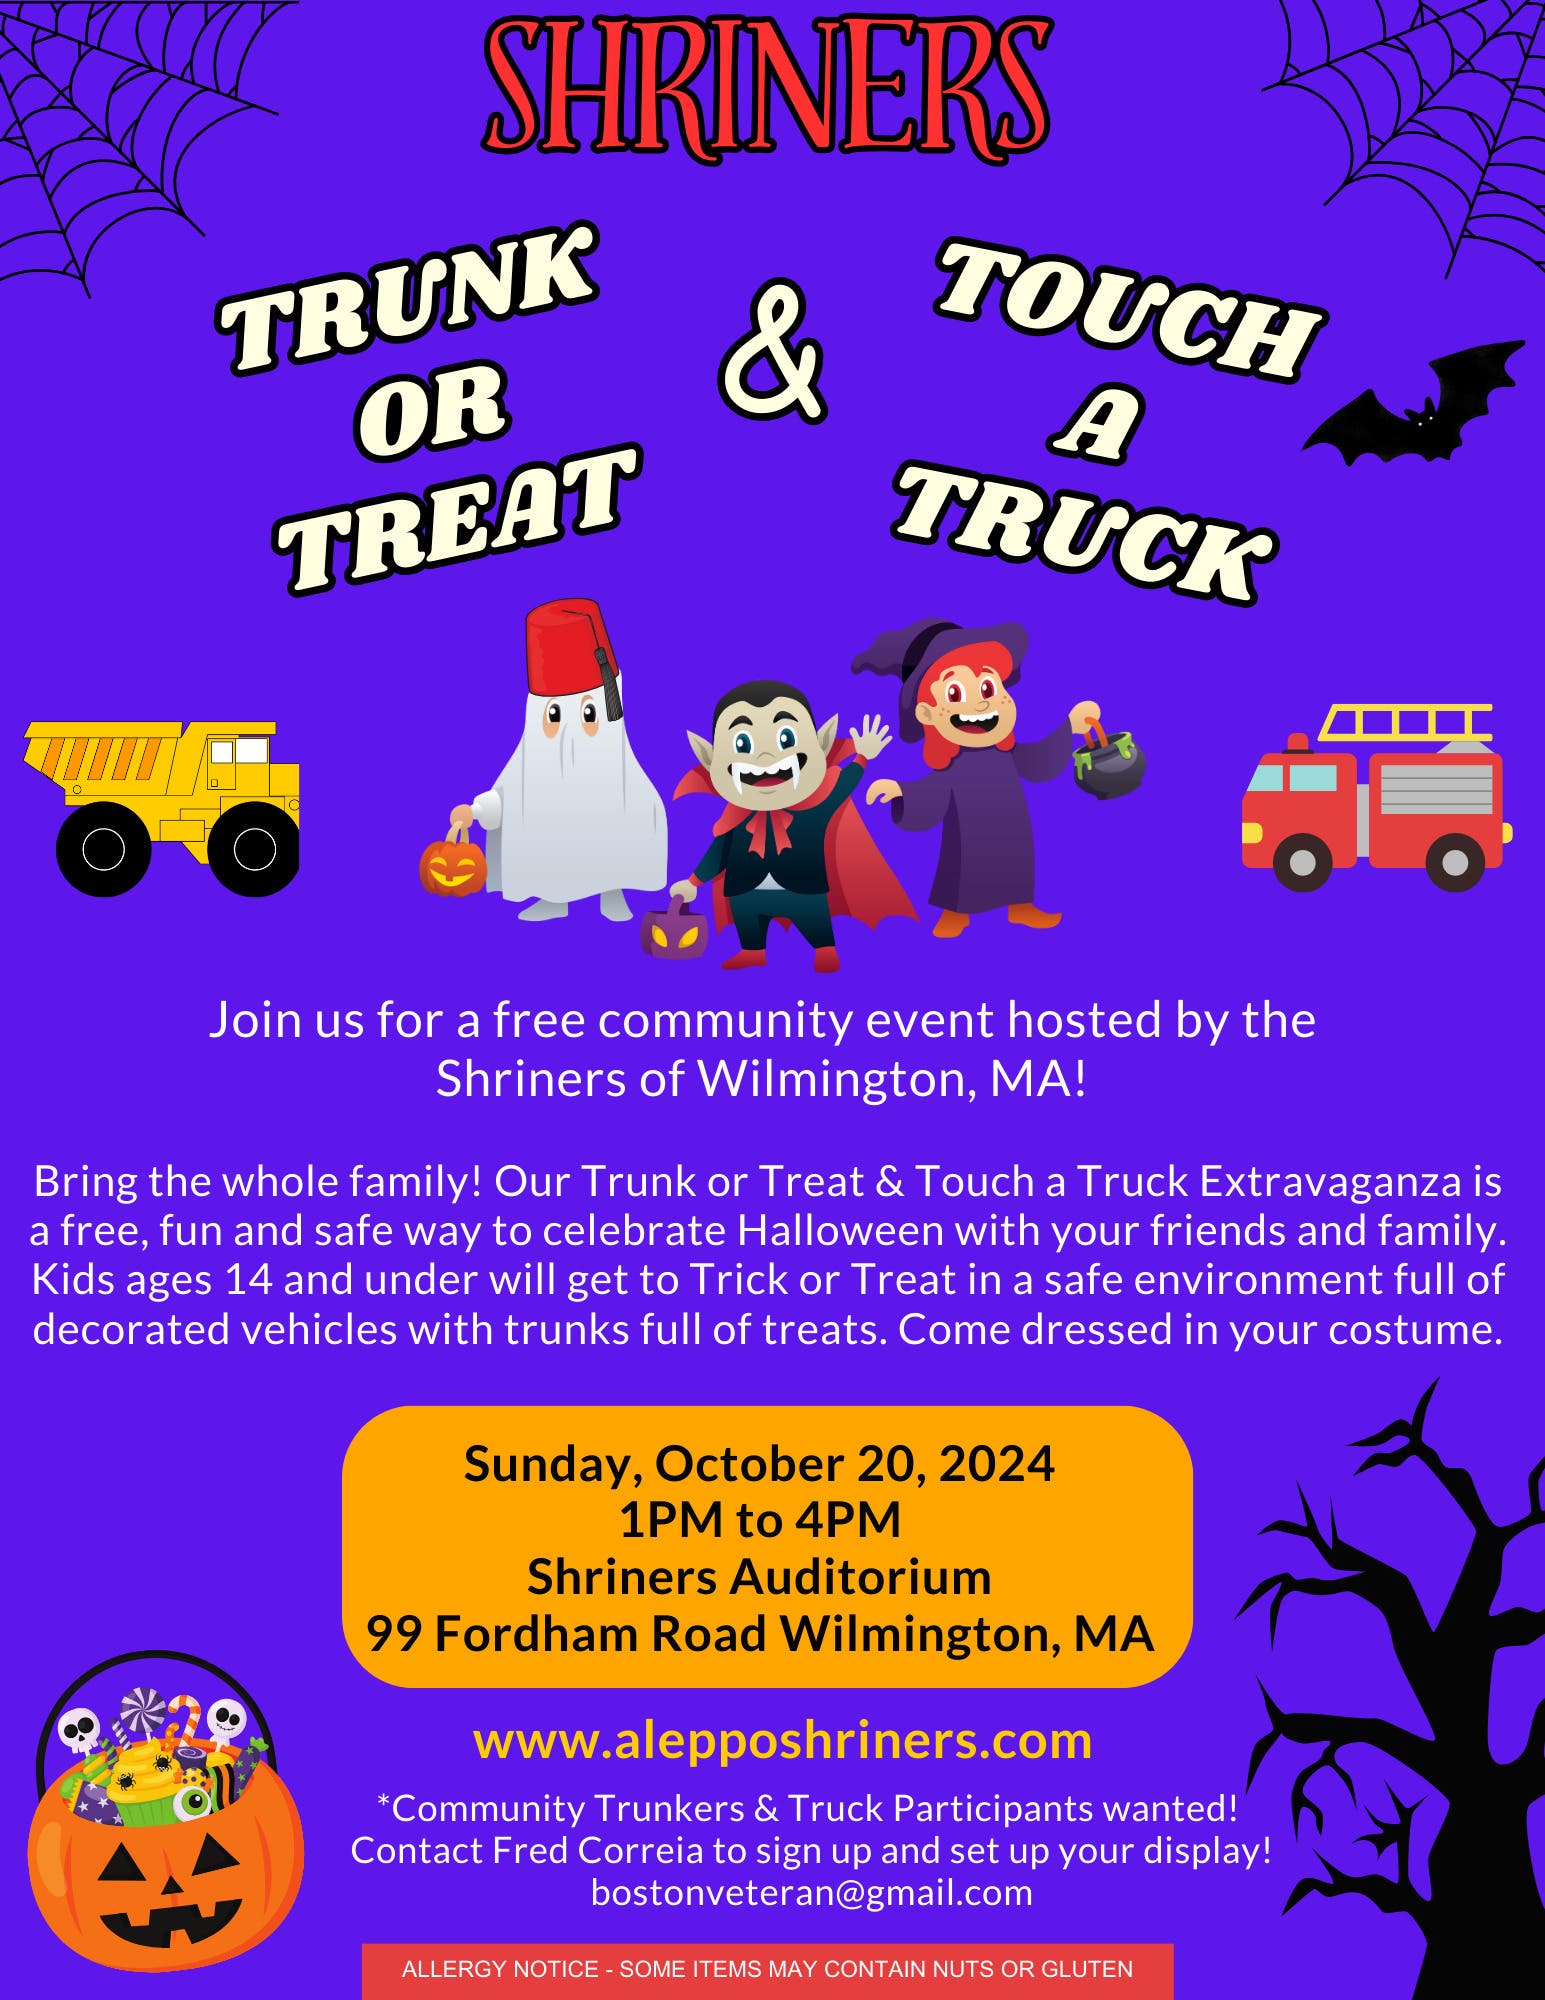 Shriners Trunk or Treat & Touch a Truck